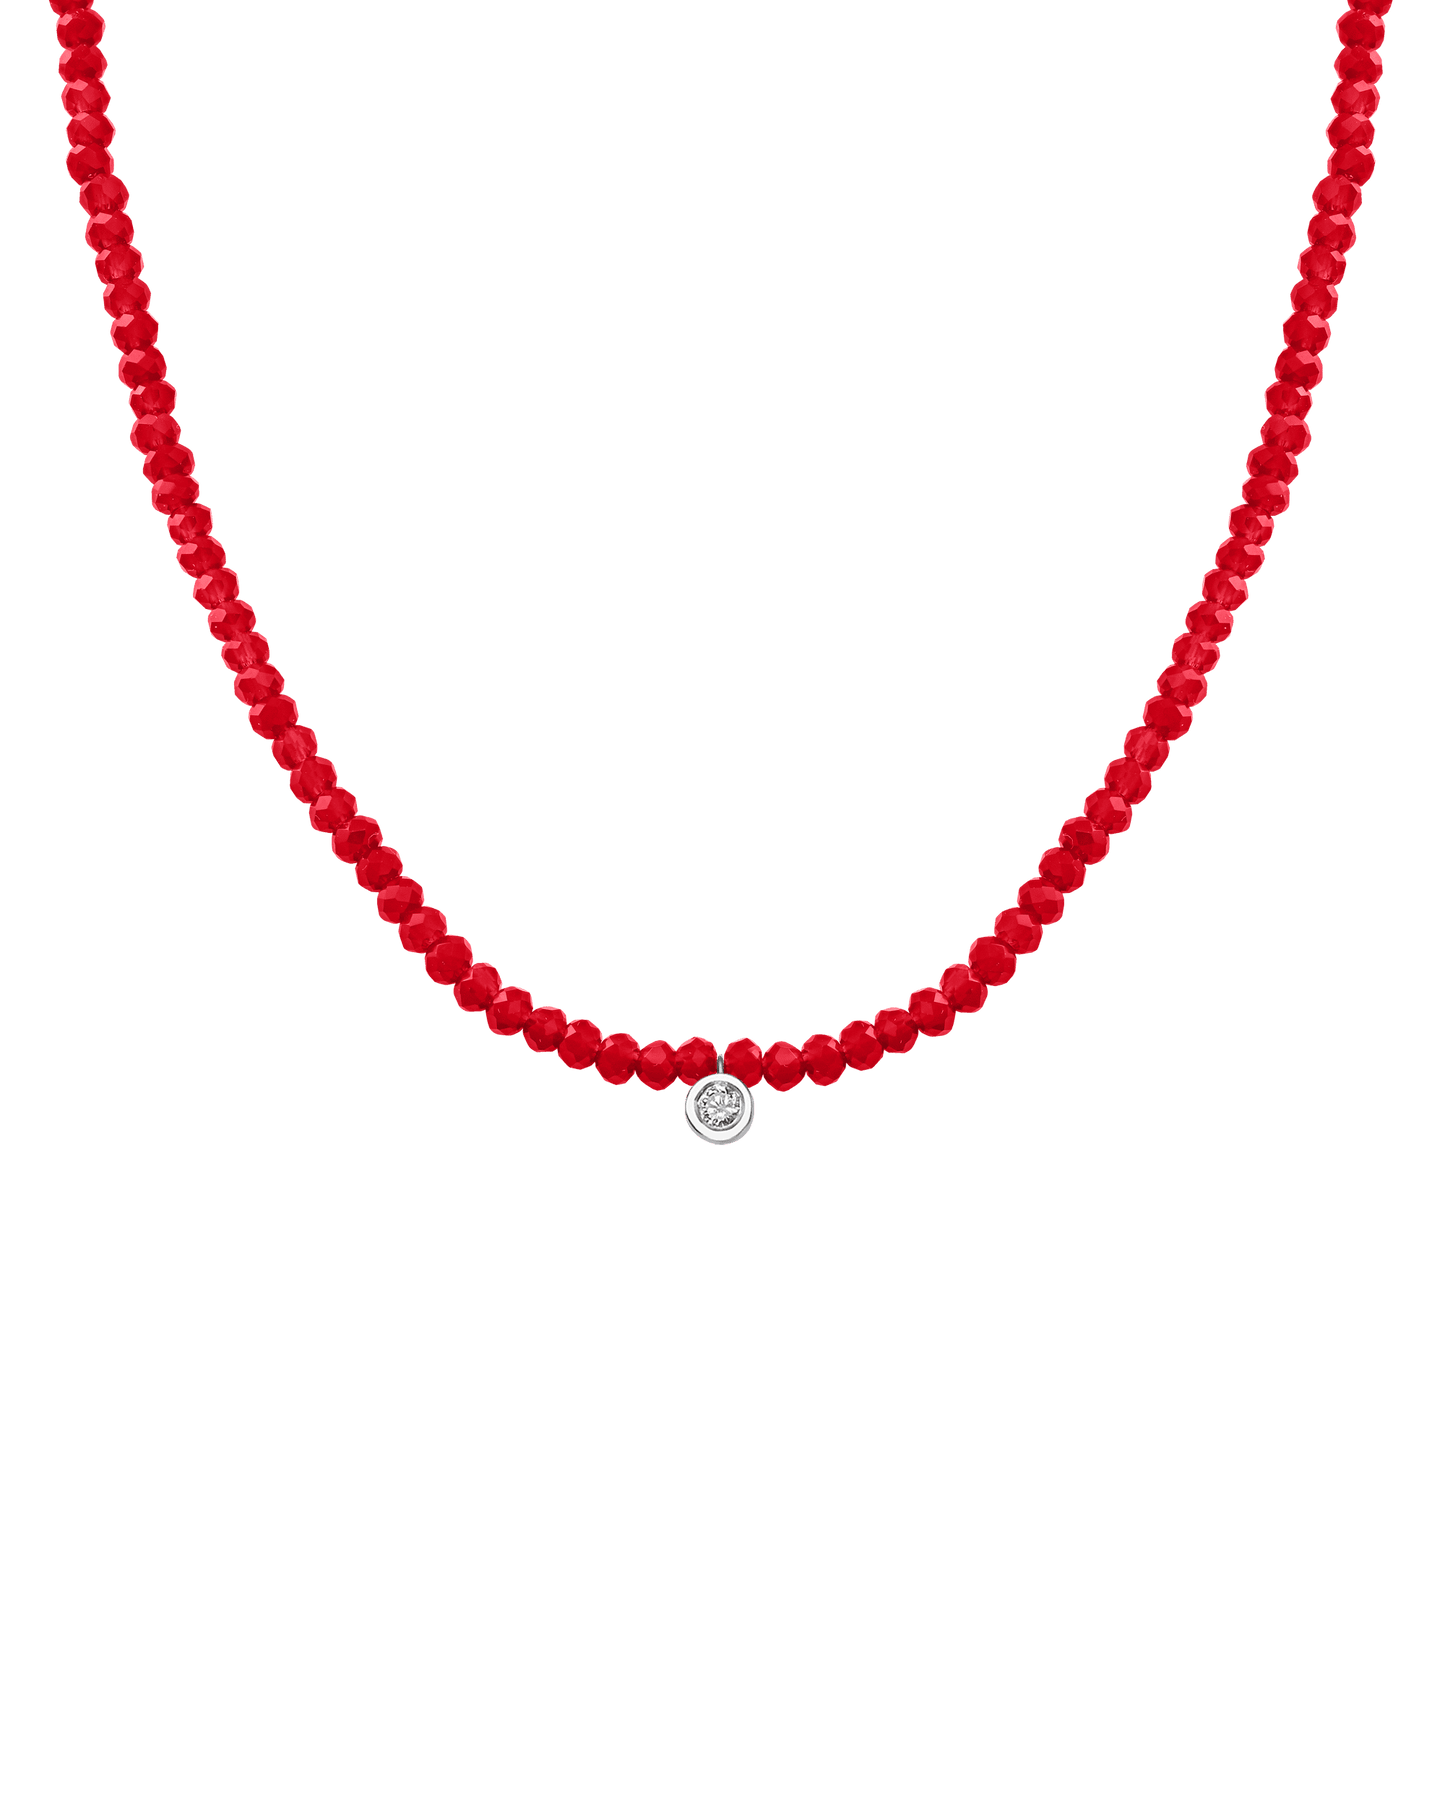 Apatite Gemstone & Diamond Necklace - 14K White Gold Necklaces 14K Solid Gold Natural Red Jade Medium: 0.05ct 14"